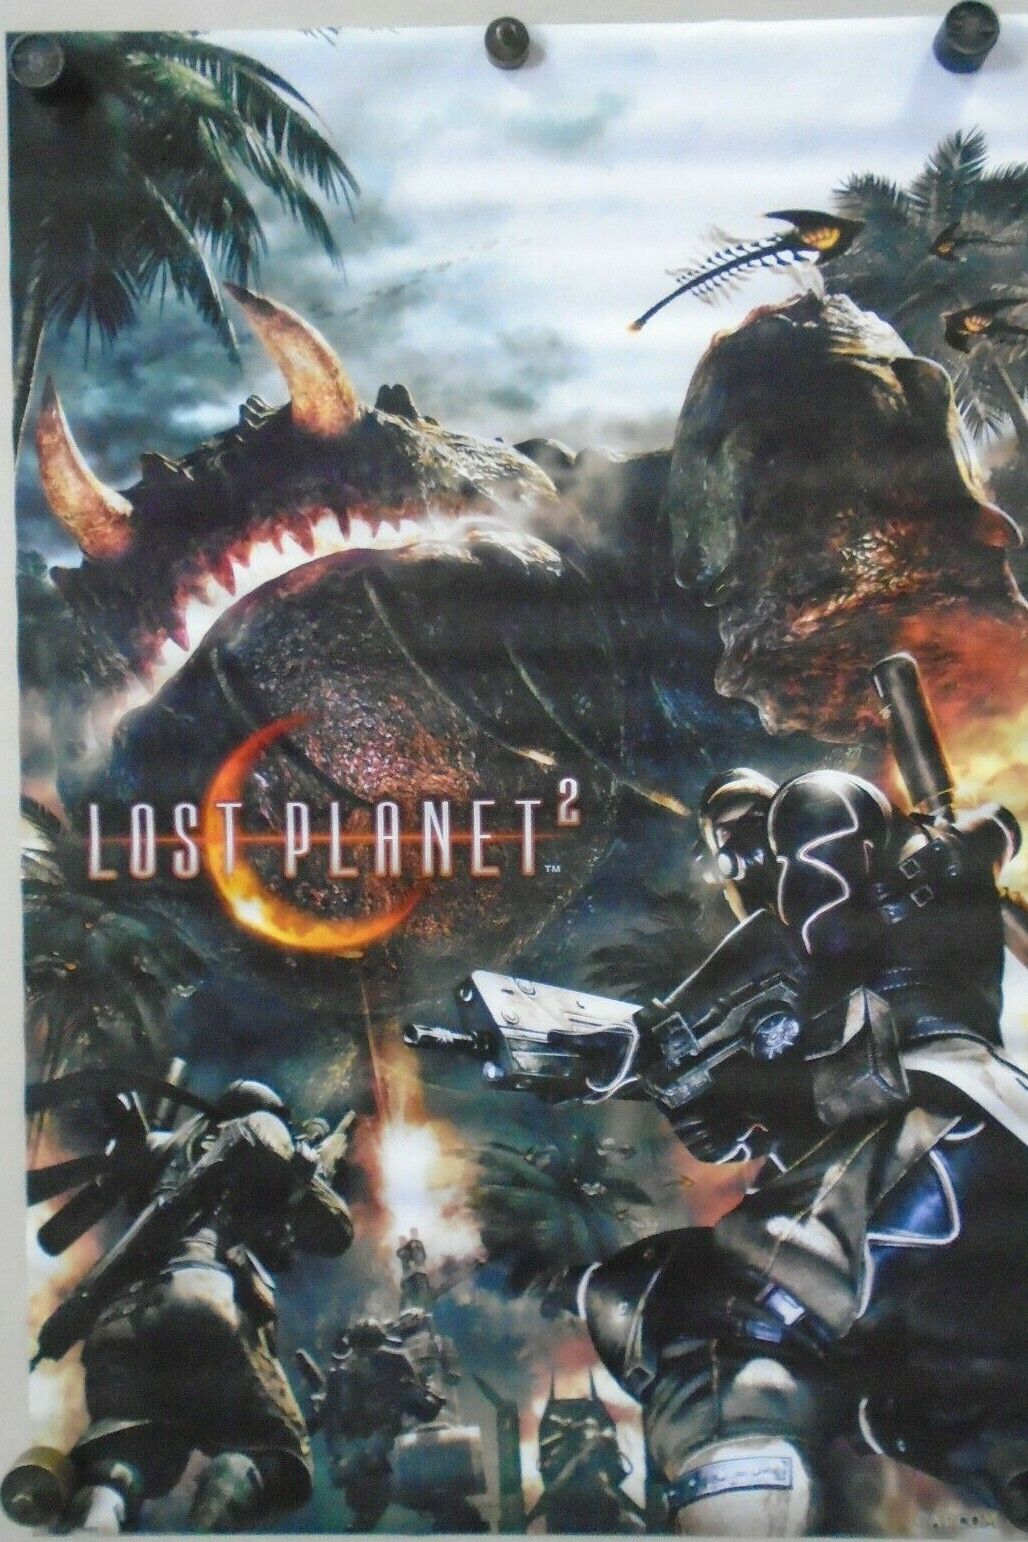 Lost Planet 2 - #32292 - Original Poster In Exc.+ New Cond. / 24 X 36"